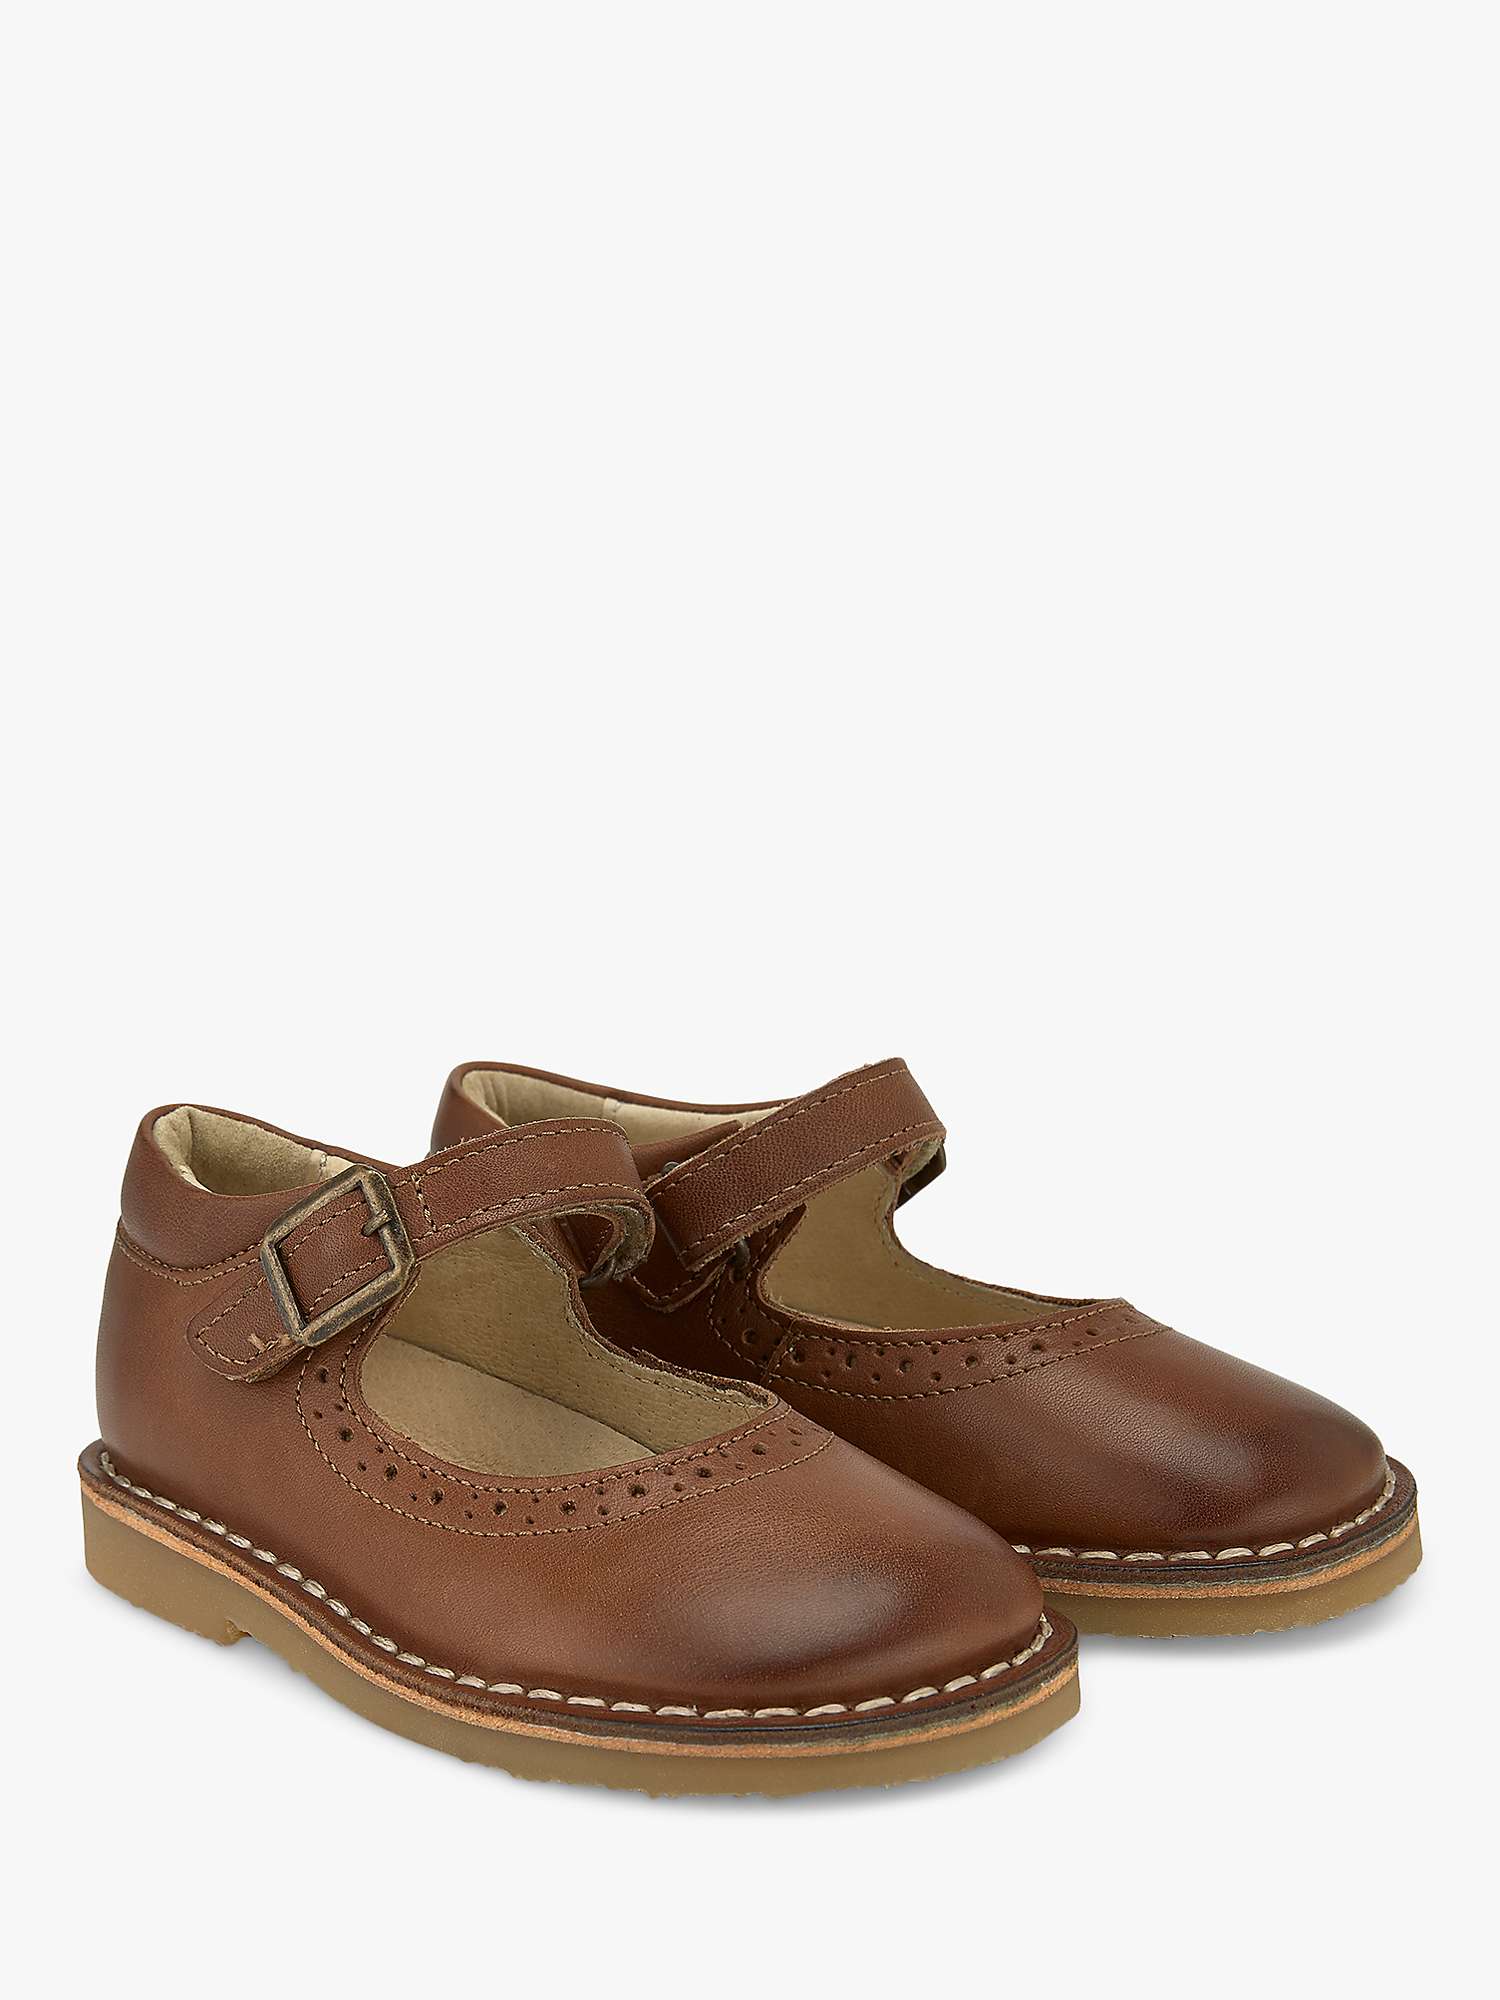 Buy Young Soles Kids' Martha Leather Mary Jane Shoes Online at johnlewis.com